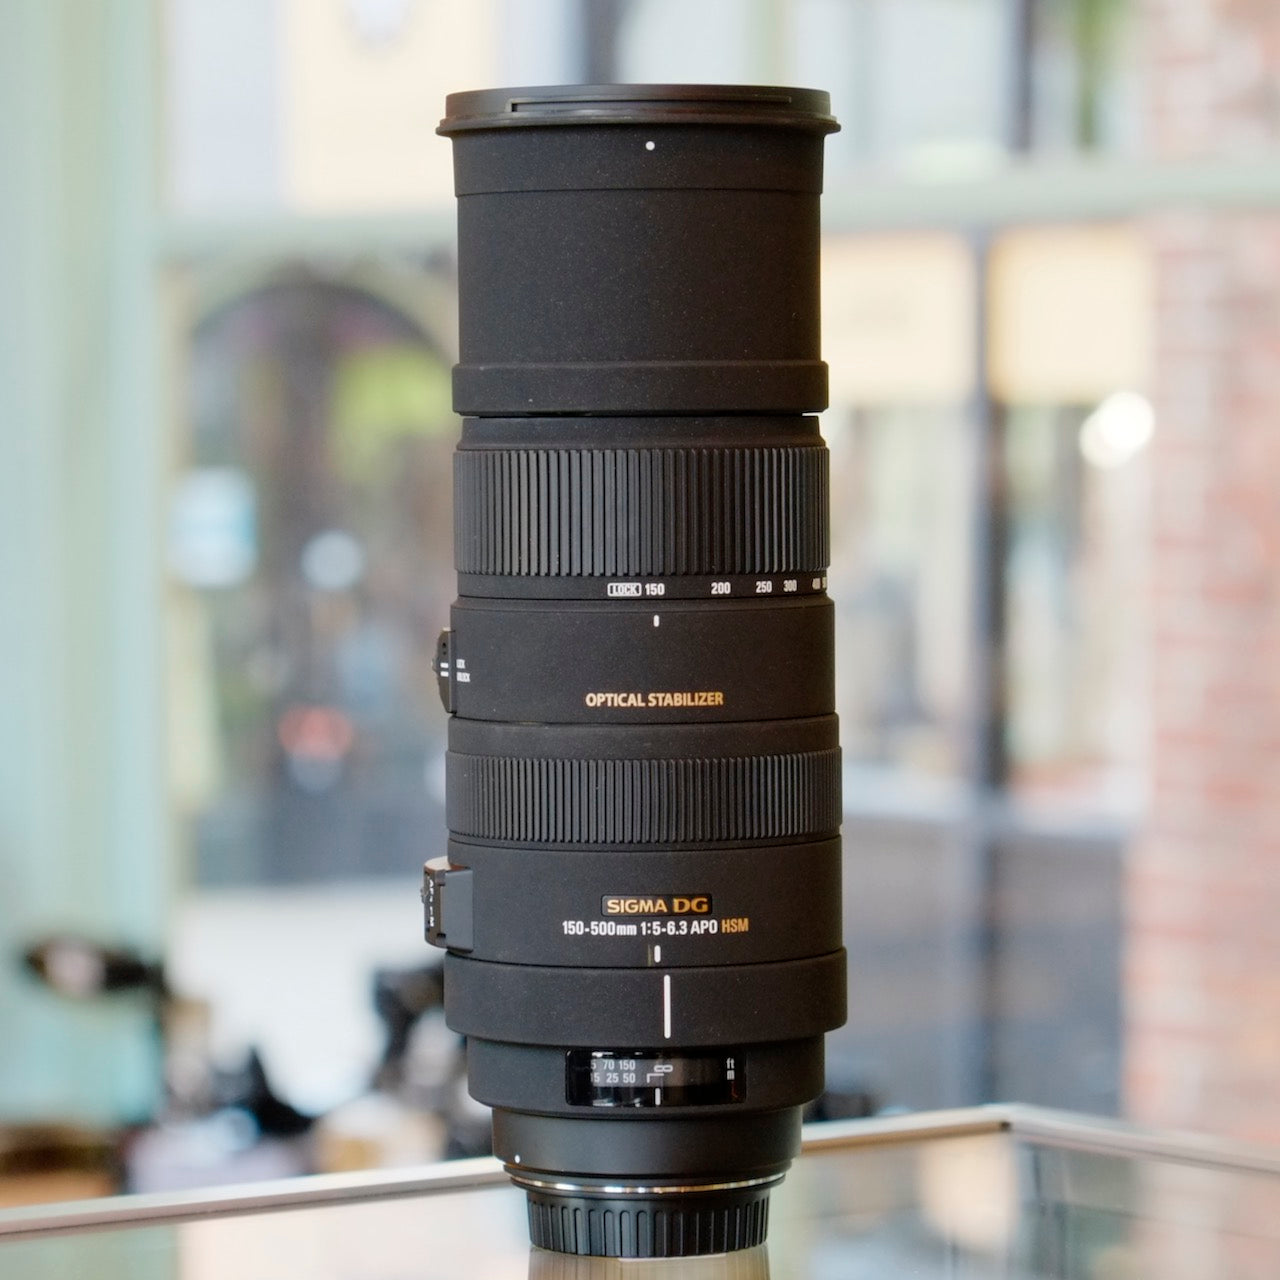 Sigma DG 150-500mm f5-6.3 APO HSM OS for Canon EF